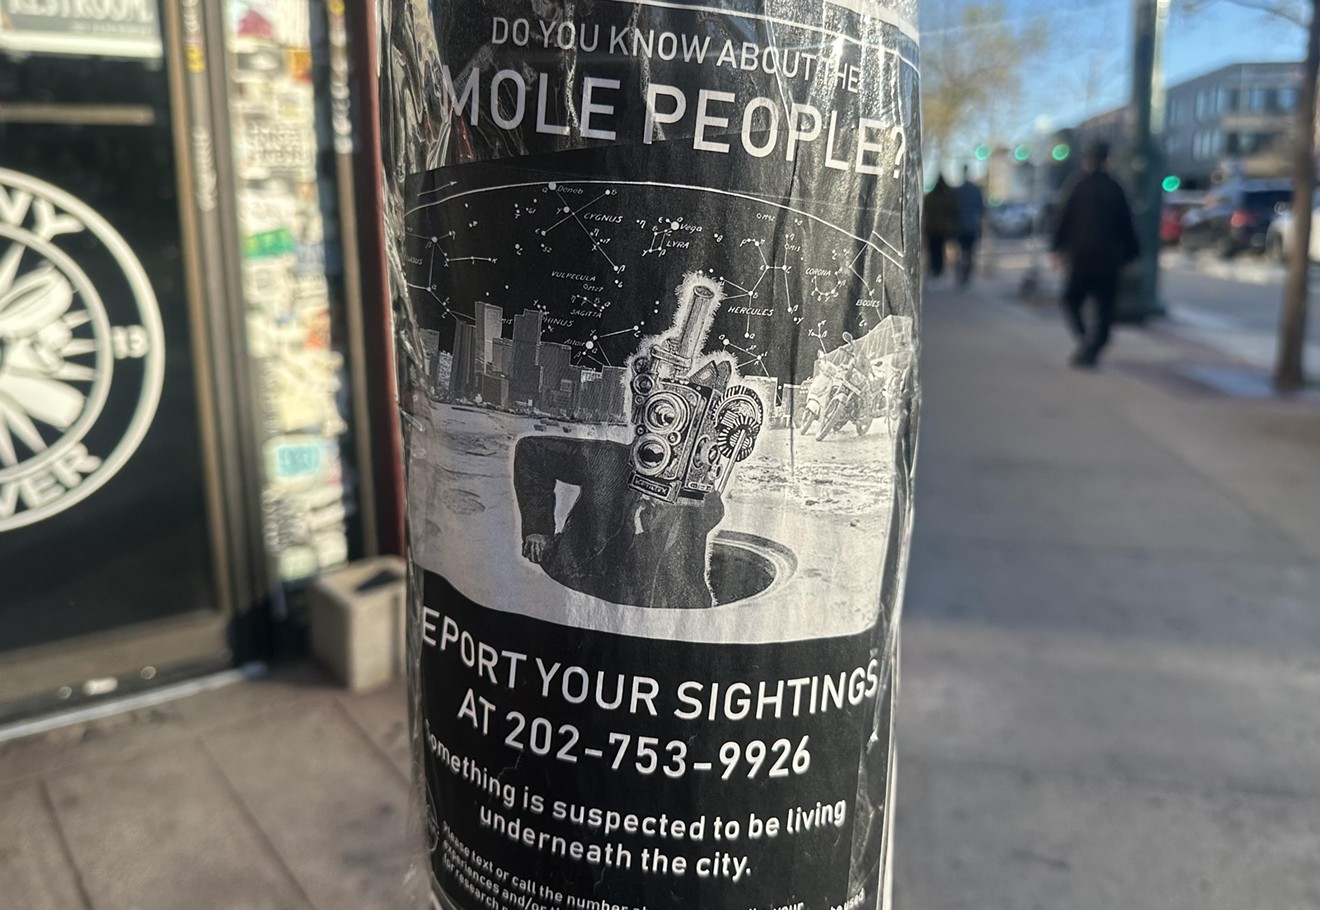 Have you seen Denver's mole people? The Bureau of Exploration wants to hear from you.